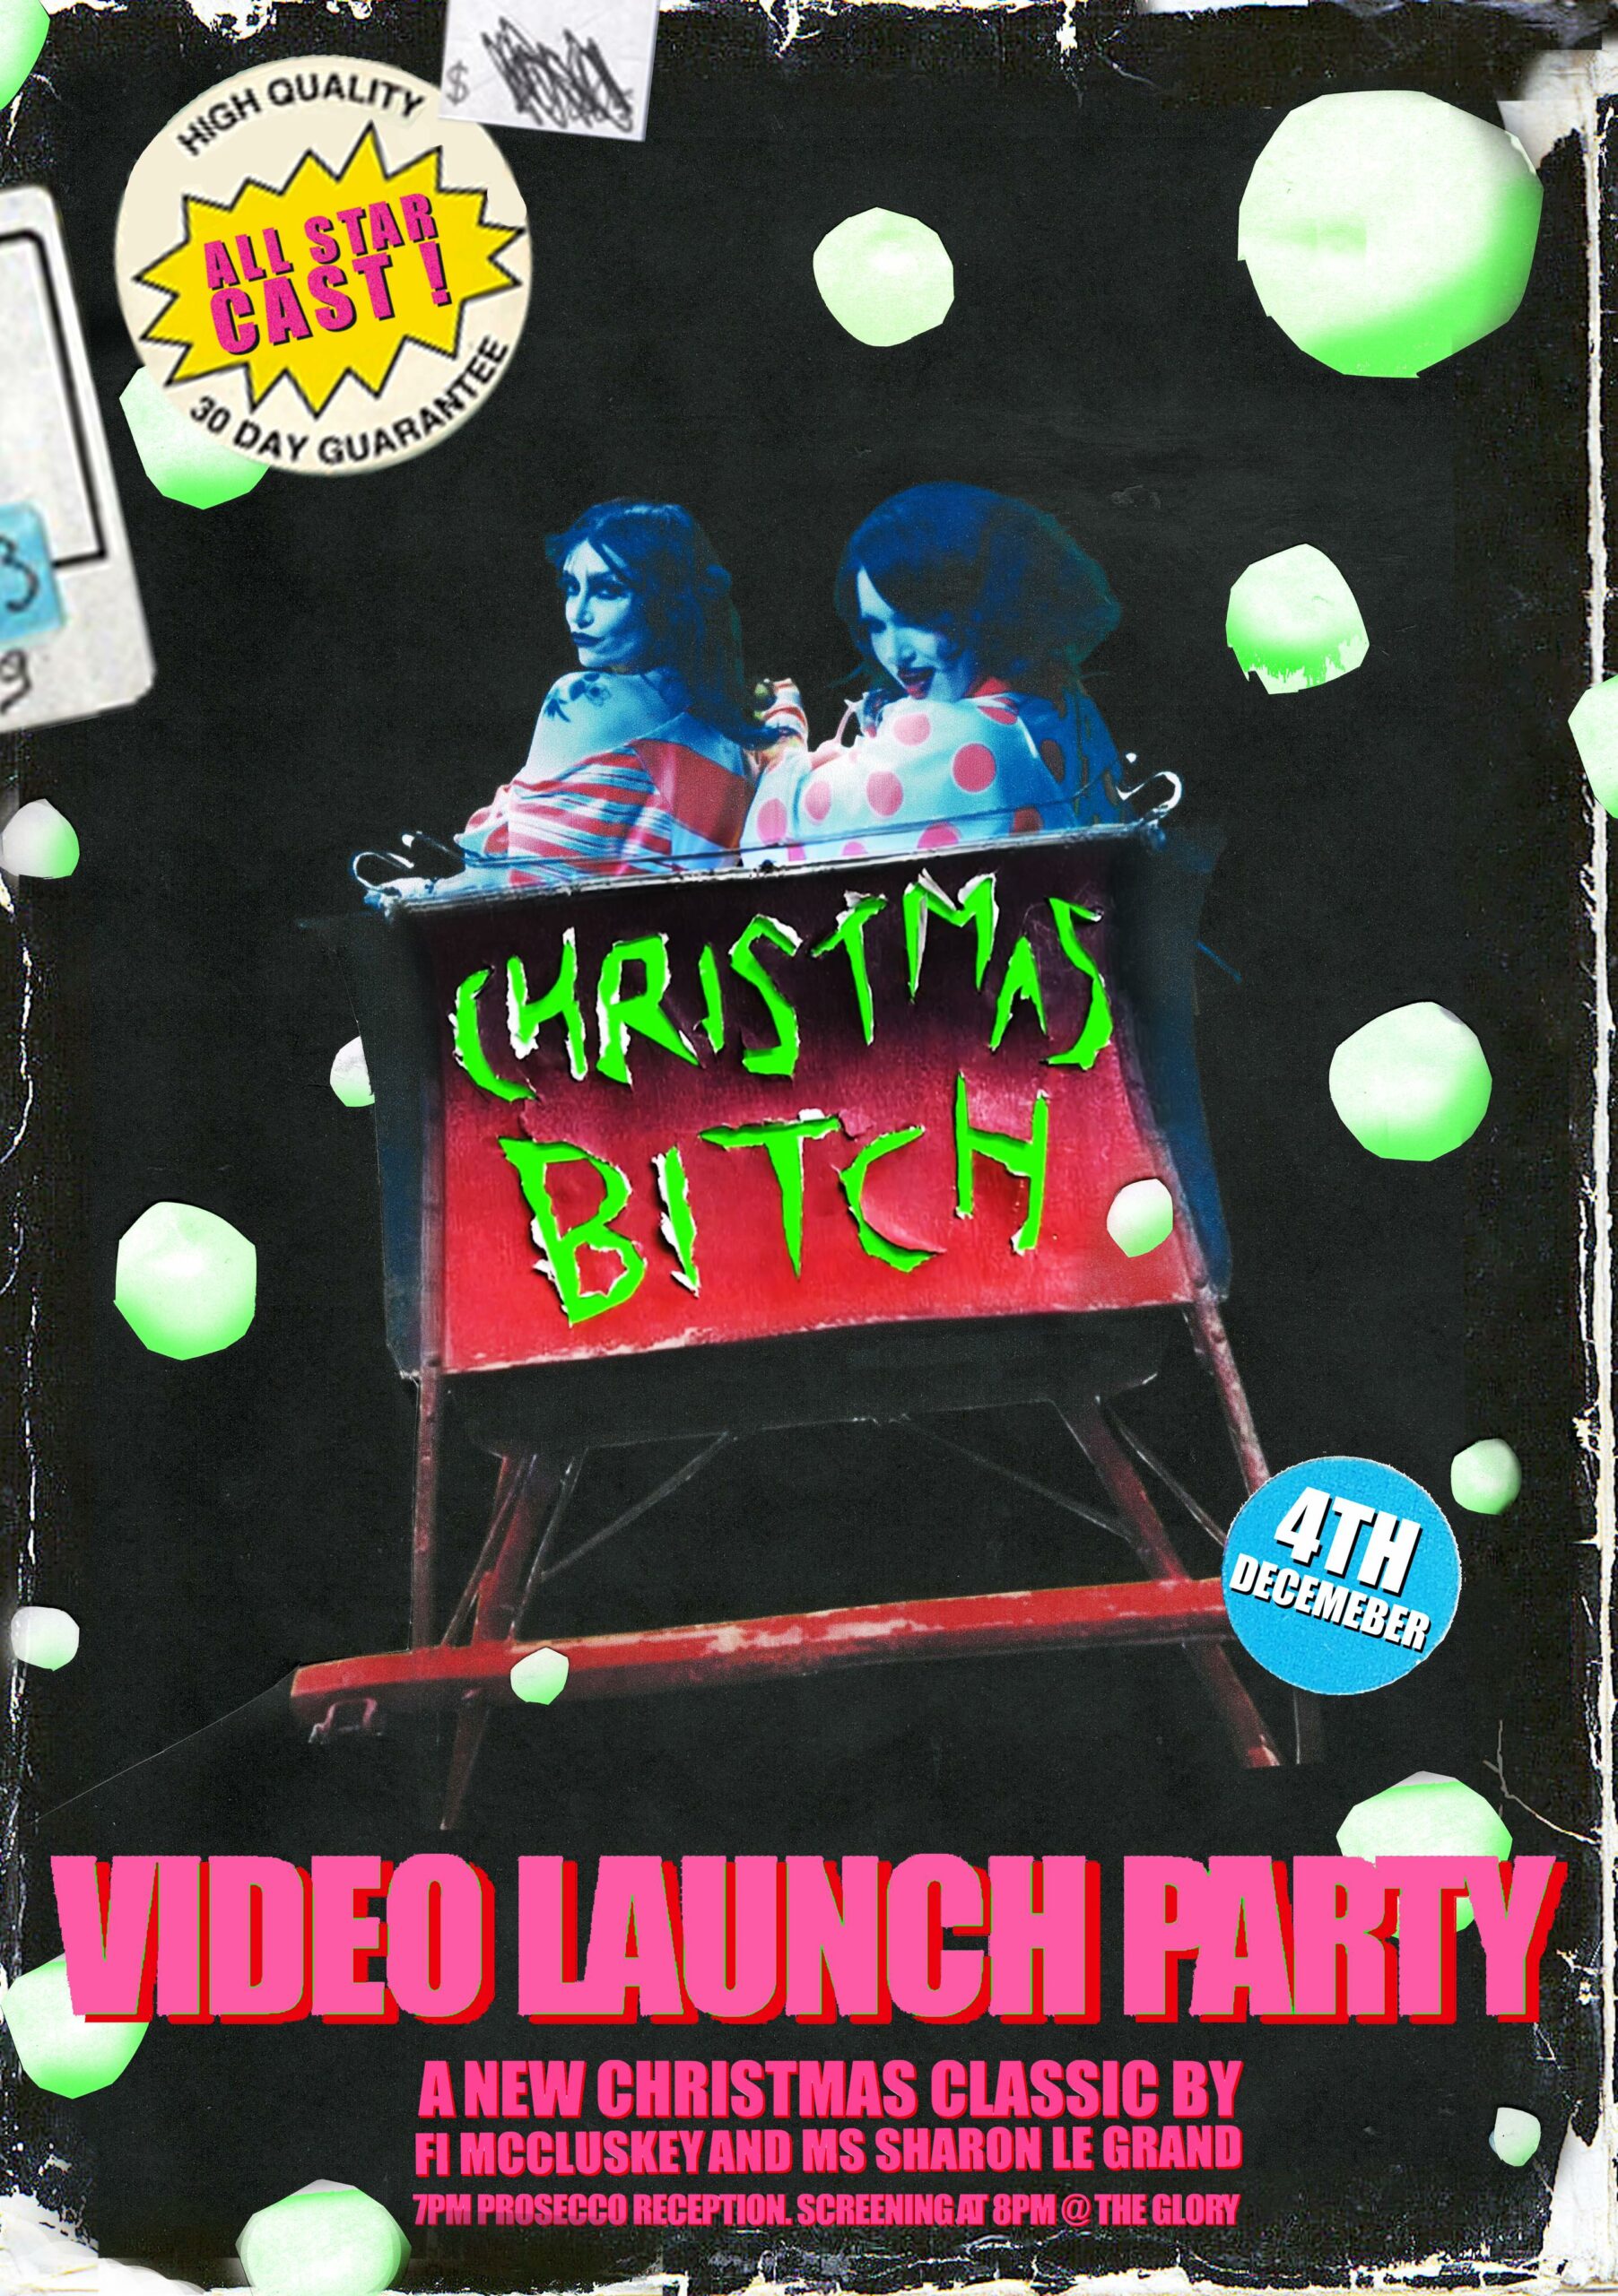 CHRISTMAS BITCH – FREE VIDEO LAUNCH PARTY